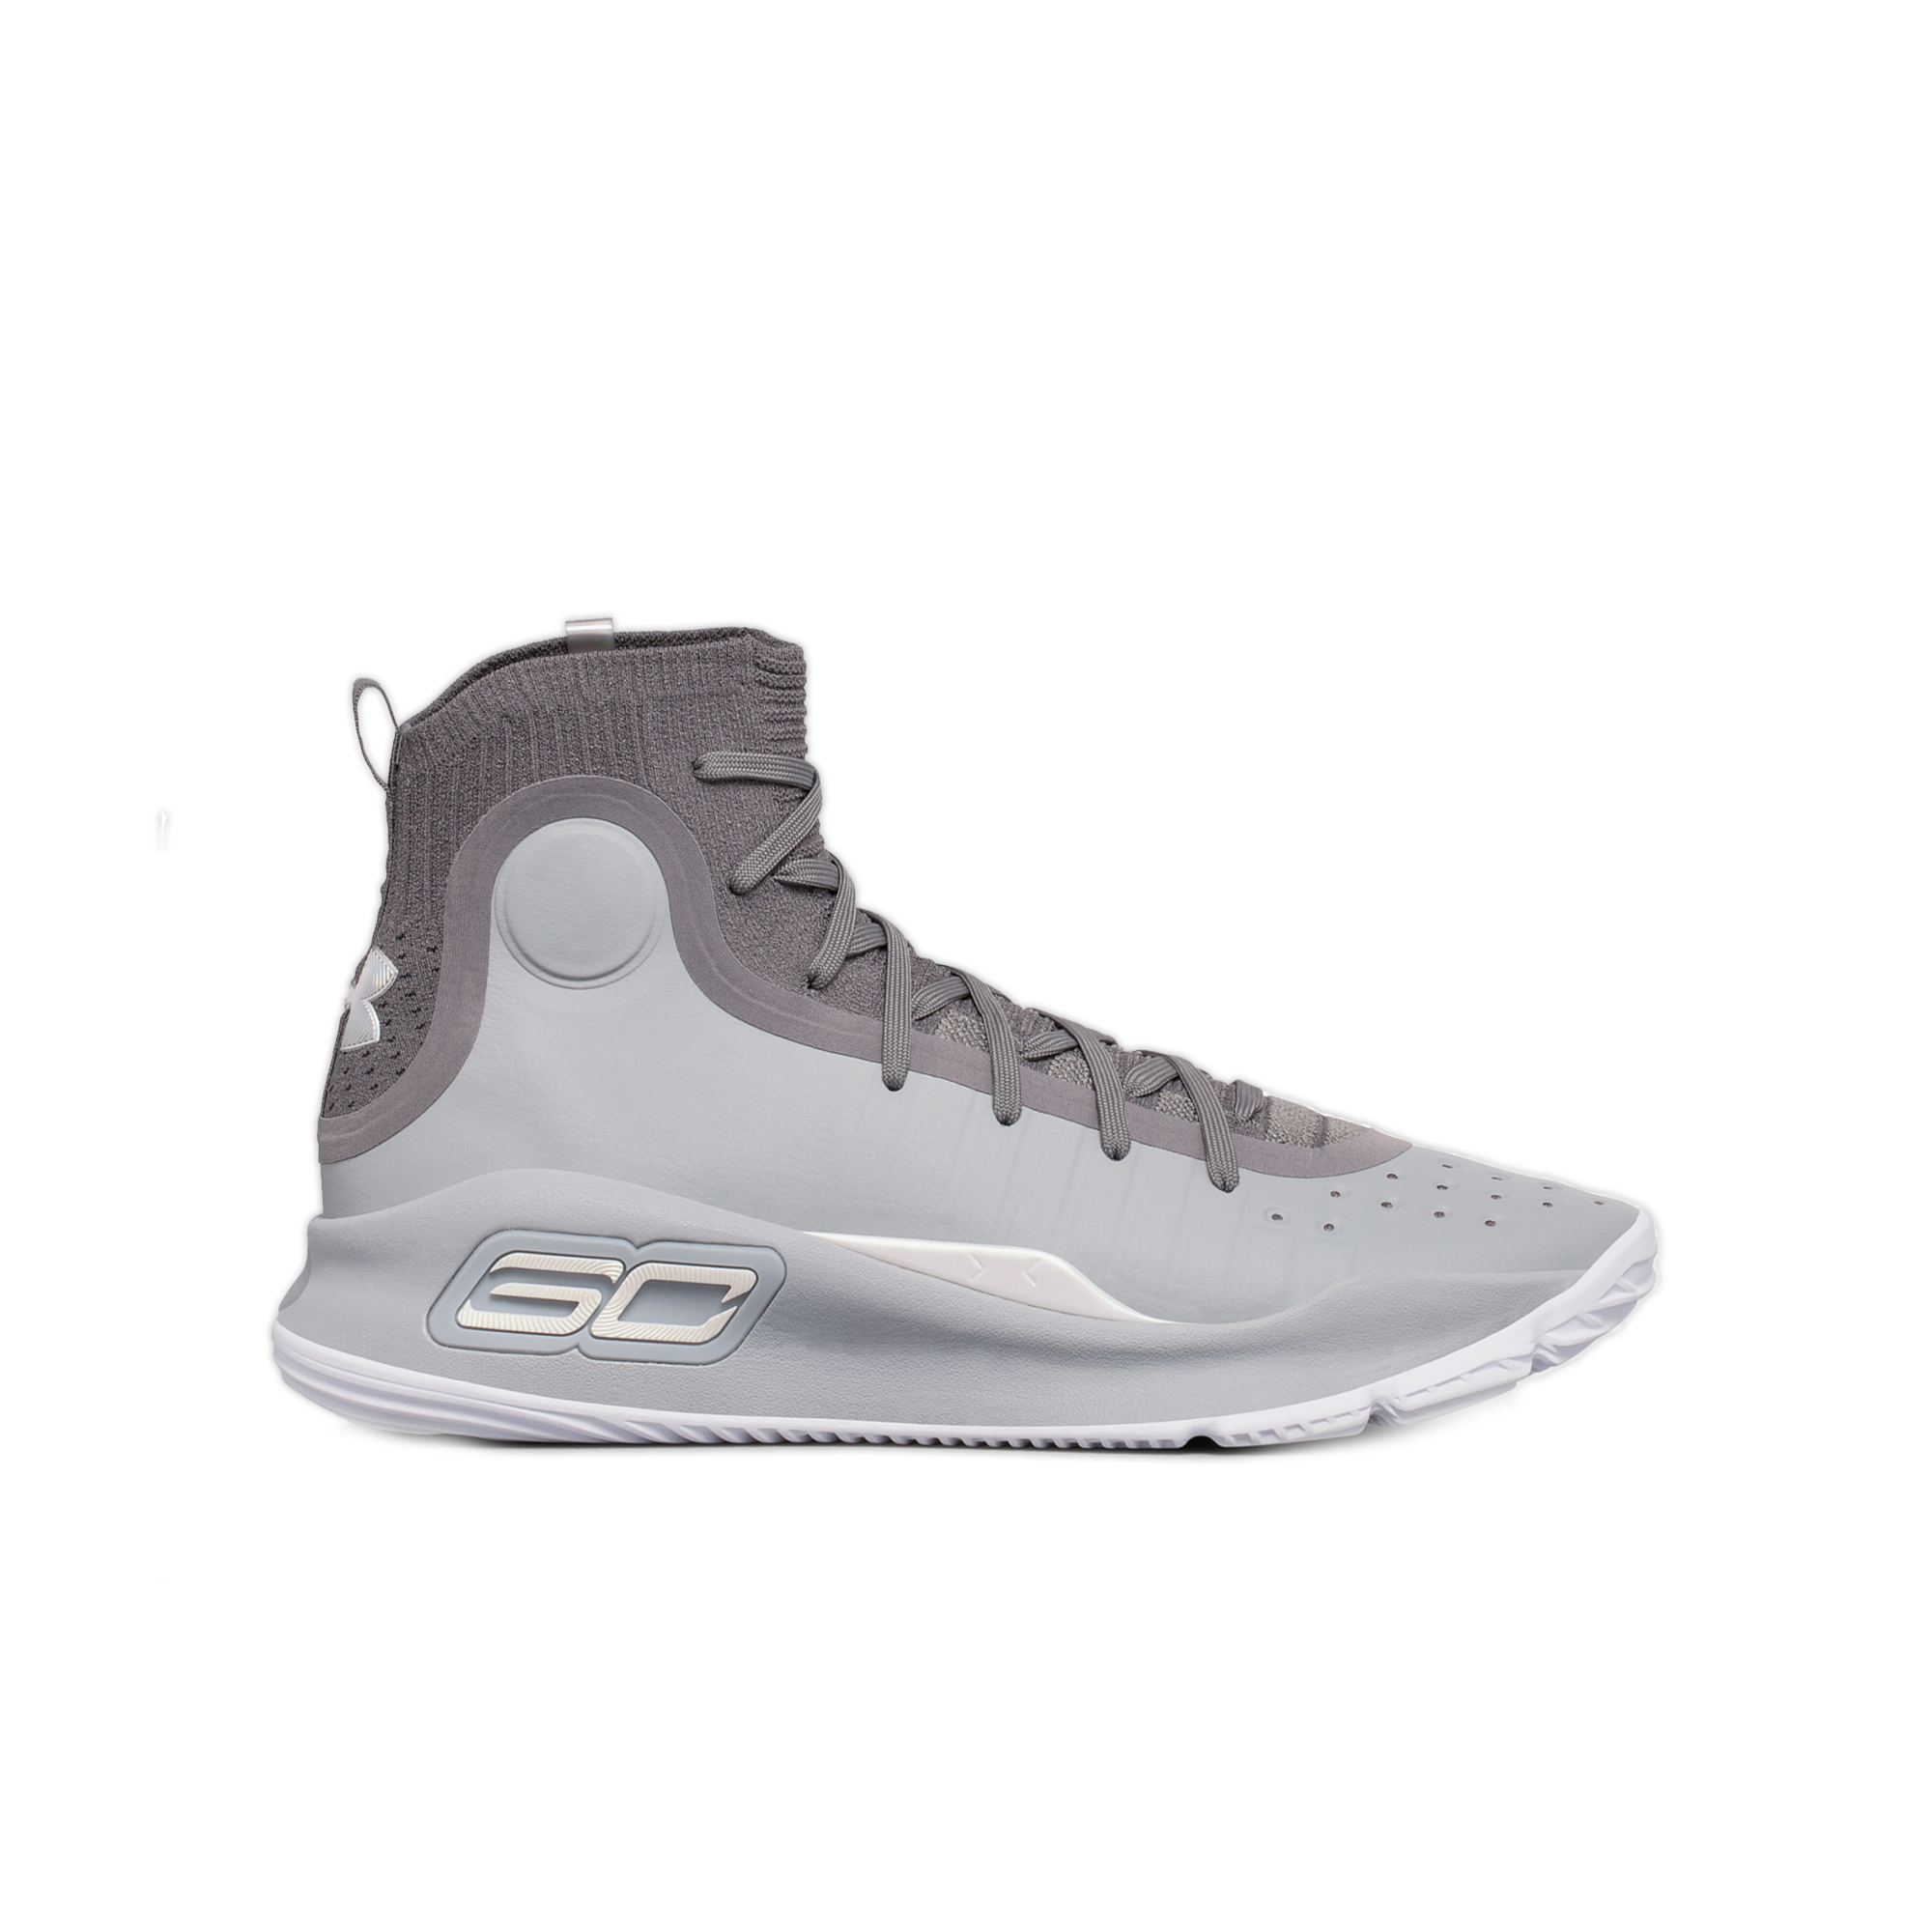 Steph Curry Shoes | Under Armour Shoes 